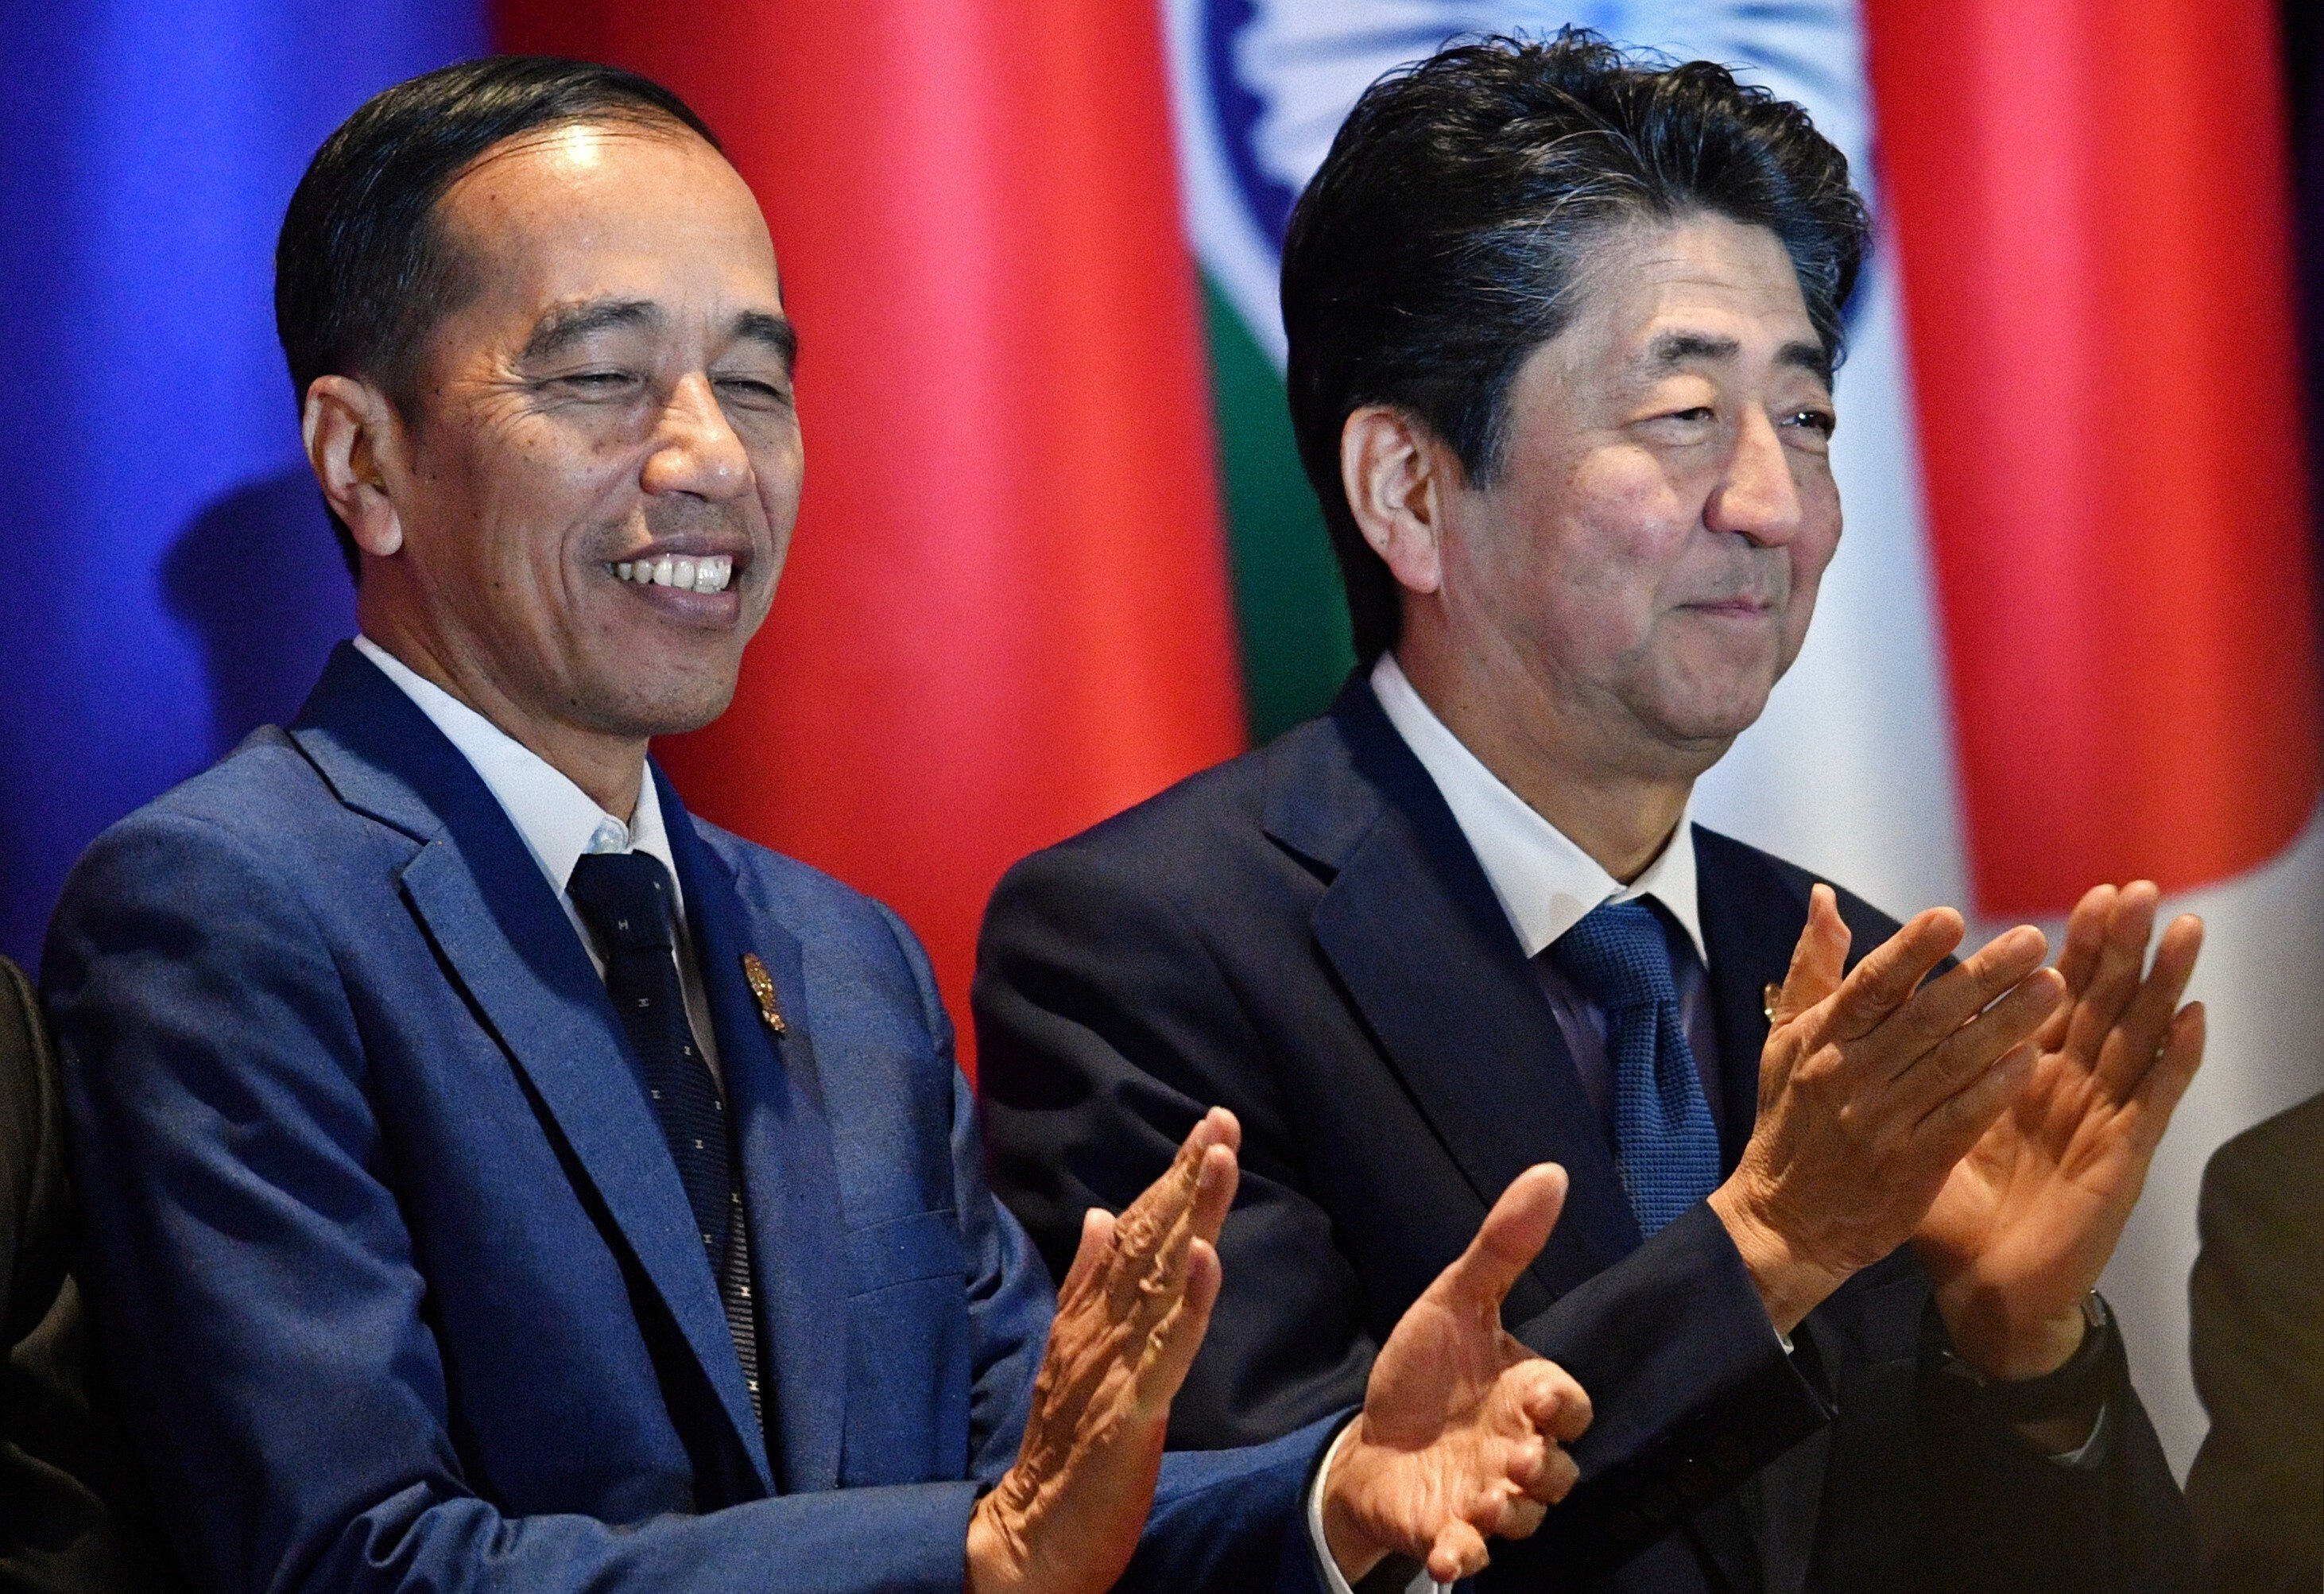 Indonesian President Joko Widodo, left, and then Japanese prime minister Shinzo Abe attend the East Asia Summit in Bangkok on November 4, 2019. Japan has long-standing ties with Southeast Asia, and those ties are likely to continue growing with the region’s centrality in the notion of the Indo-Pacific. Photo: Reuters